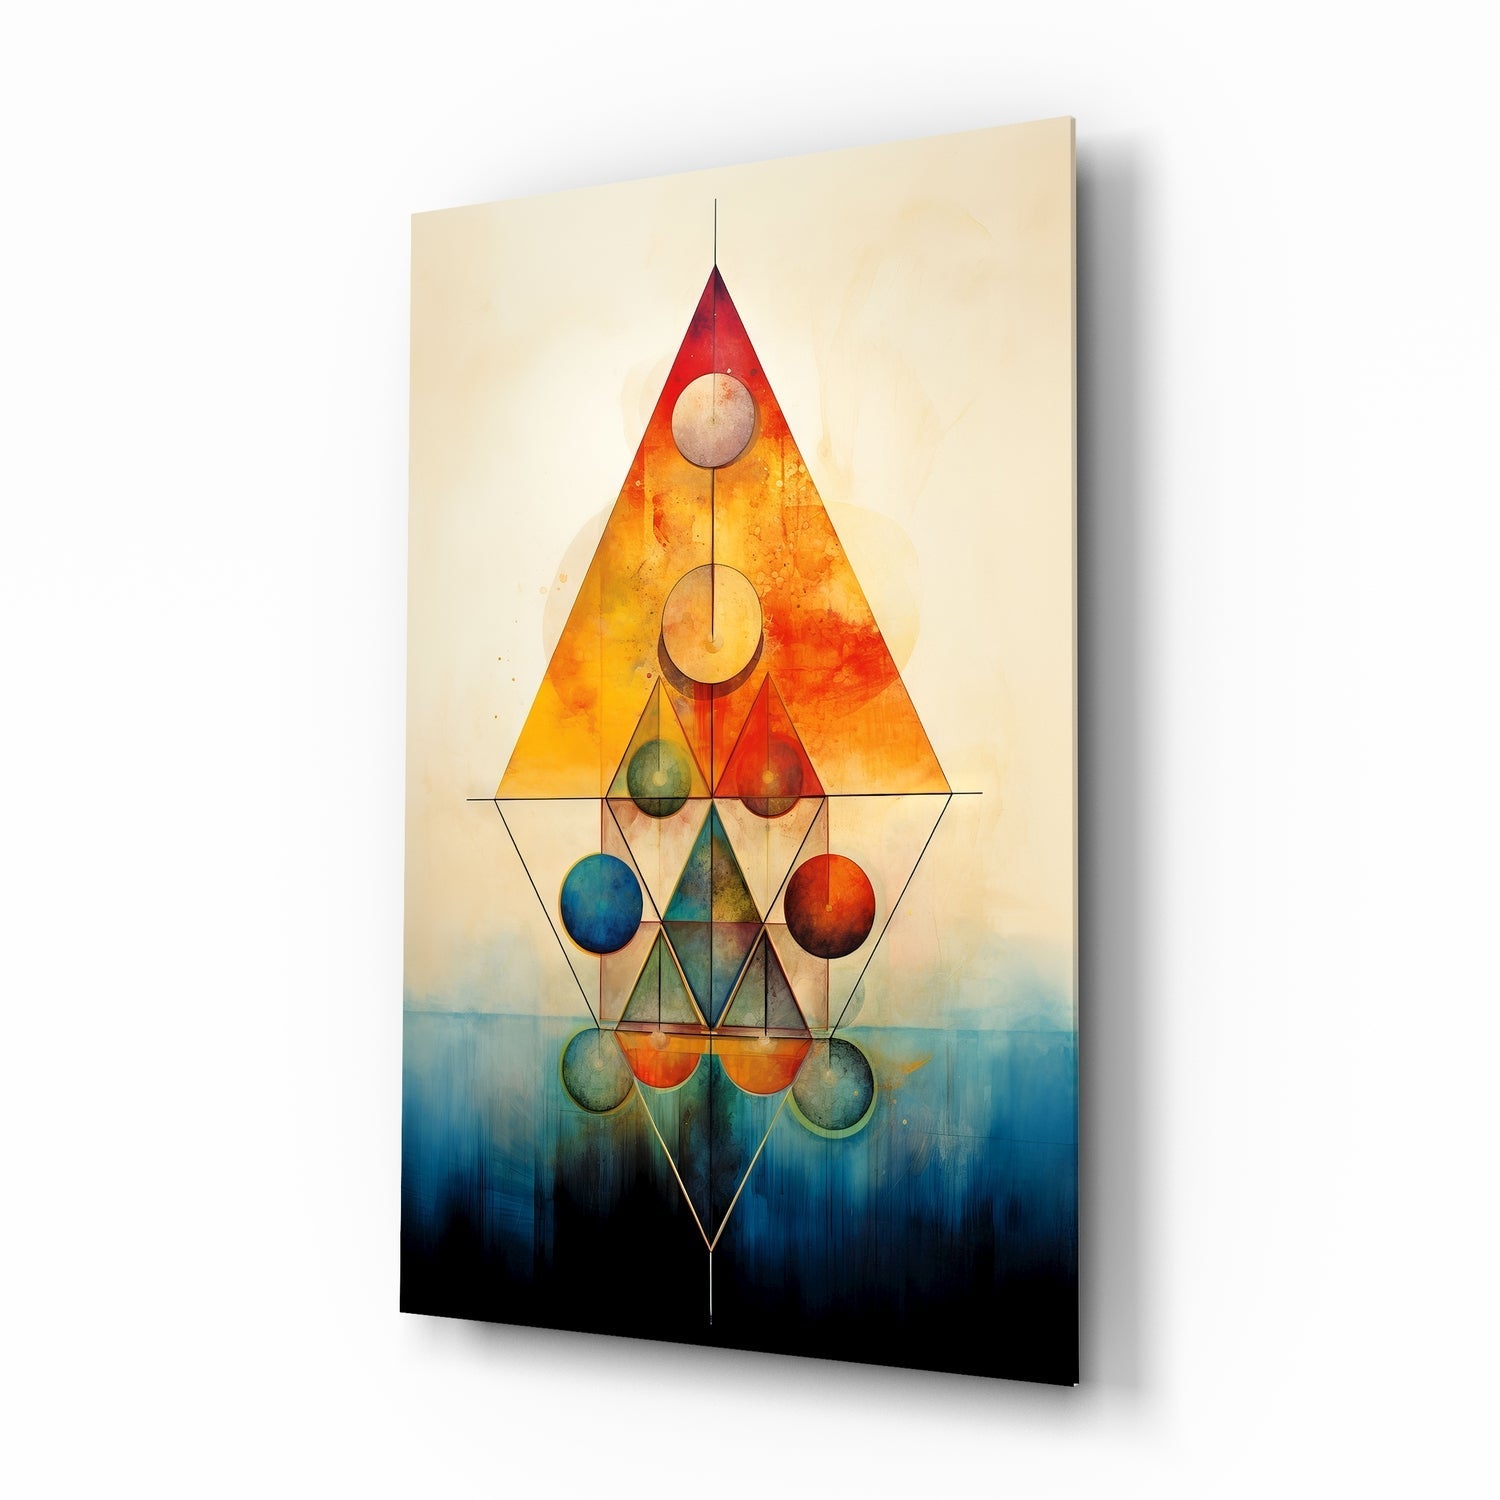 Harmony of Shapes Glass Wall Art|| Designer's Collection